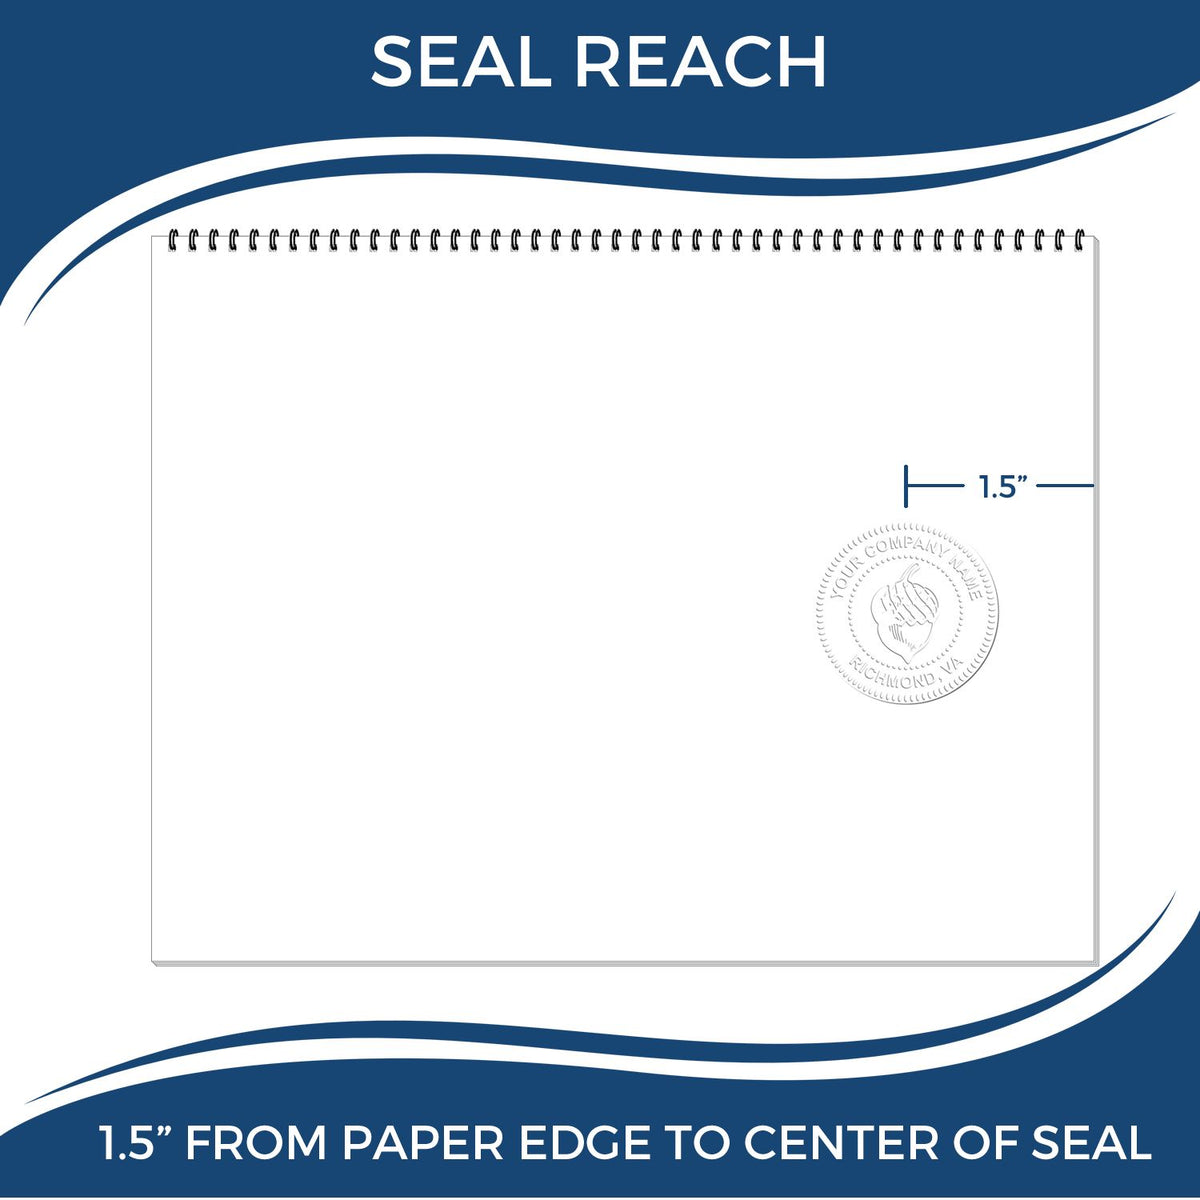 An infographic showing the seal reach which is represented by a ruler and a miniature seal image of the Soft Pocket Nevada Landscape Architect Embosser